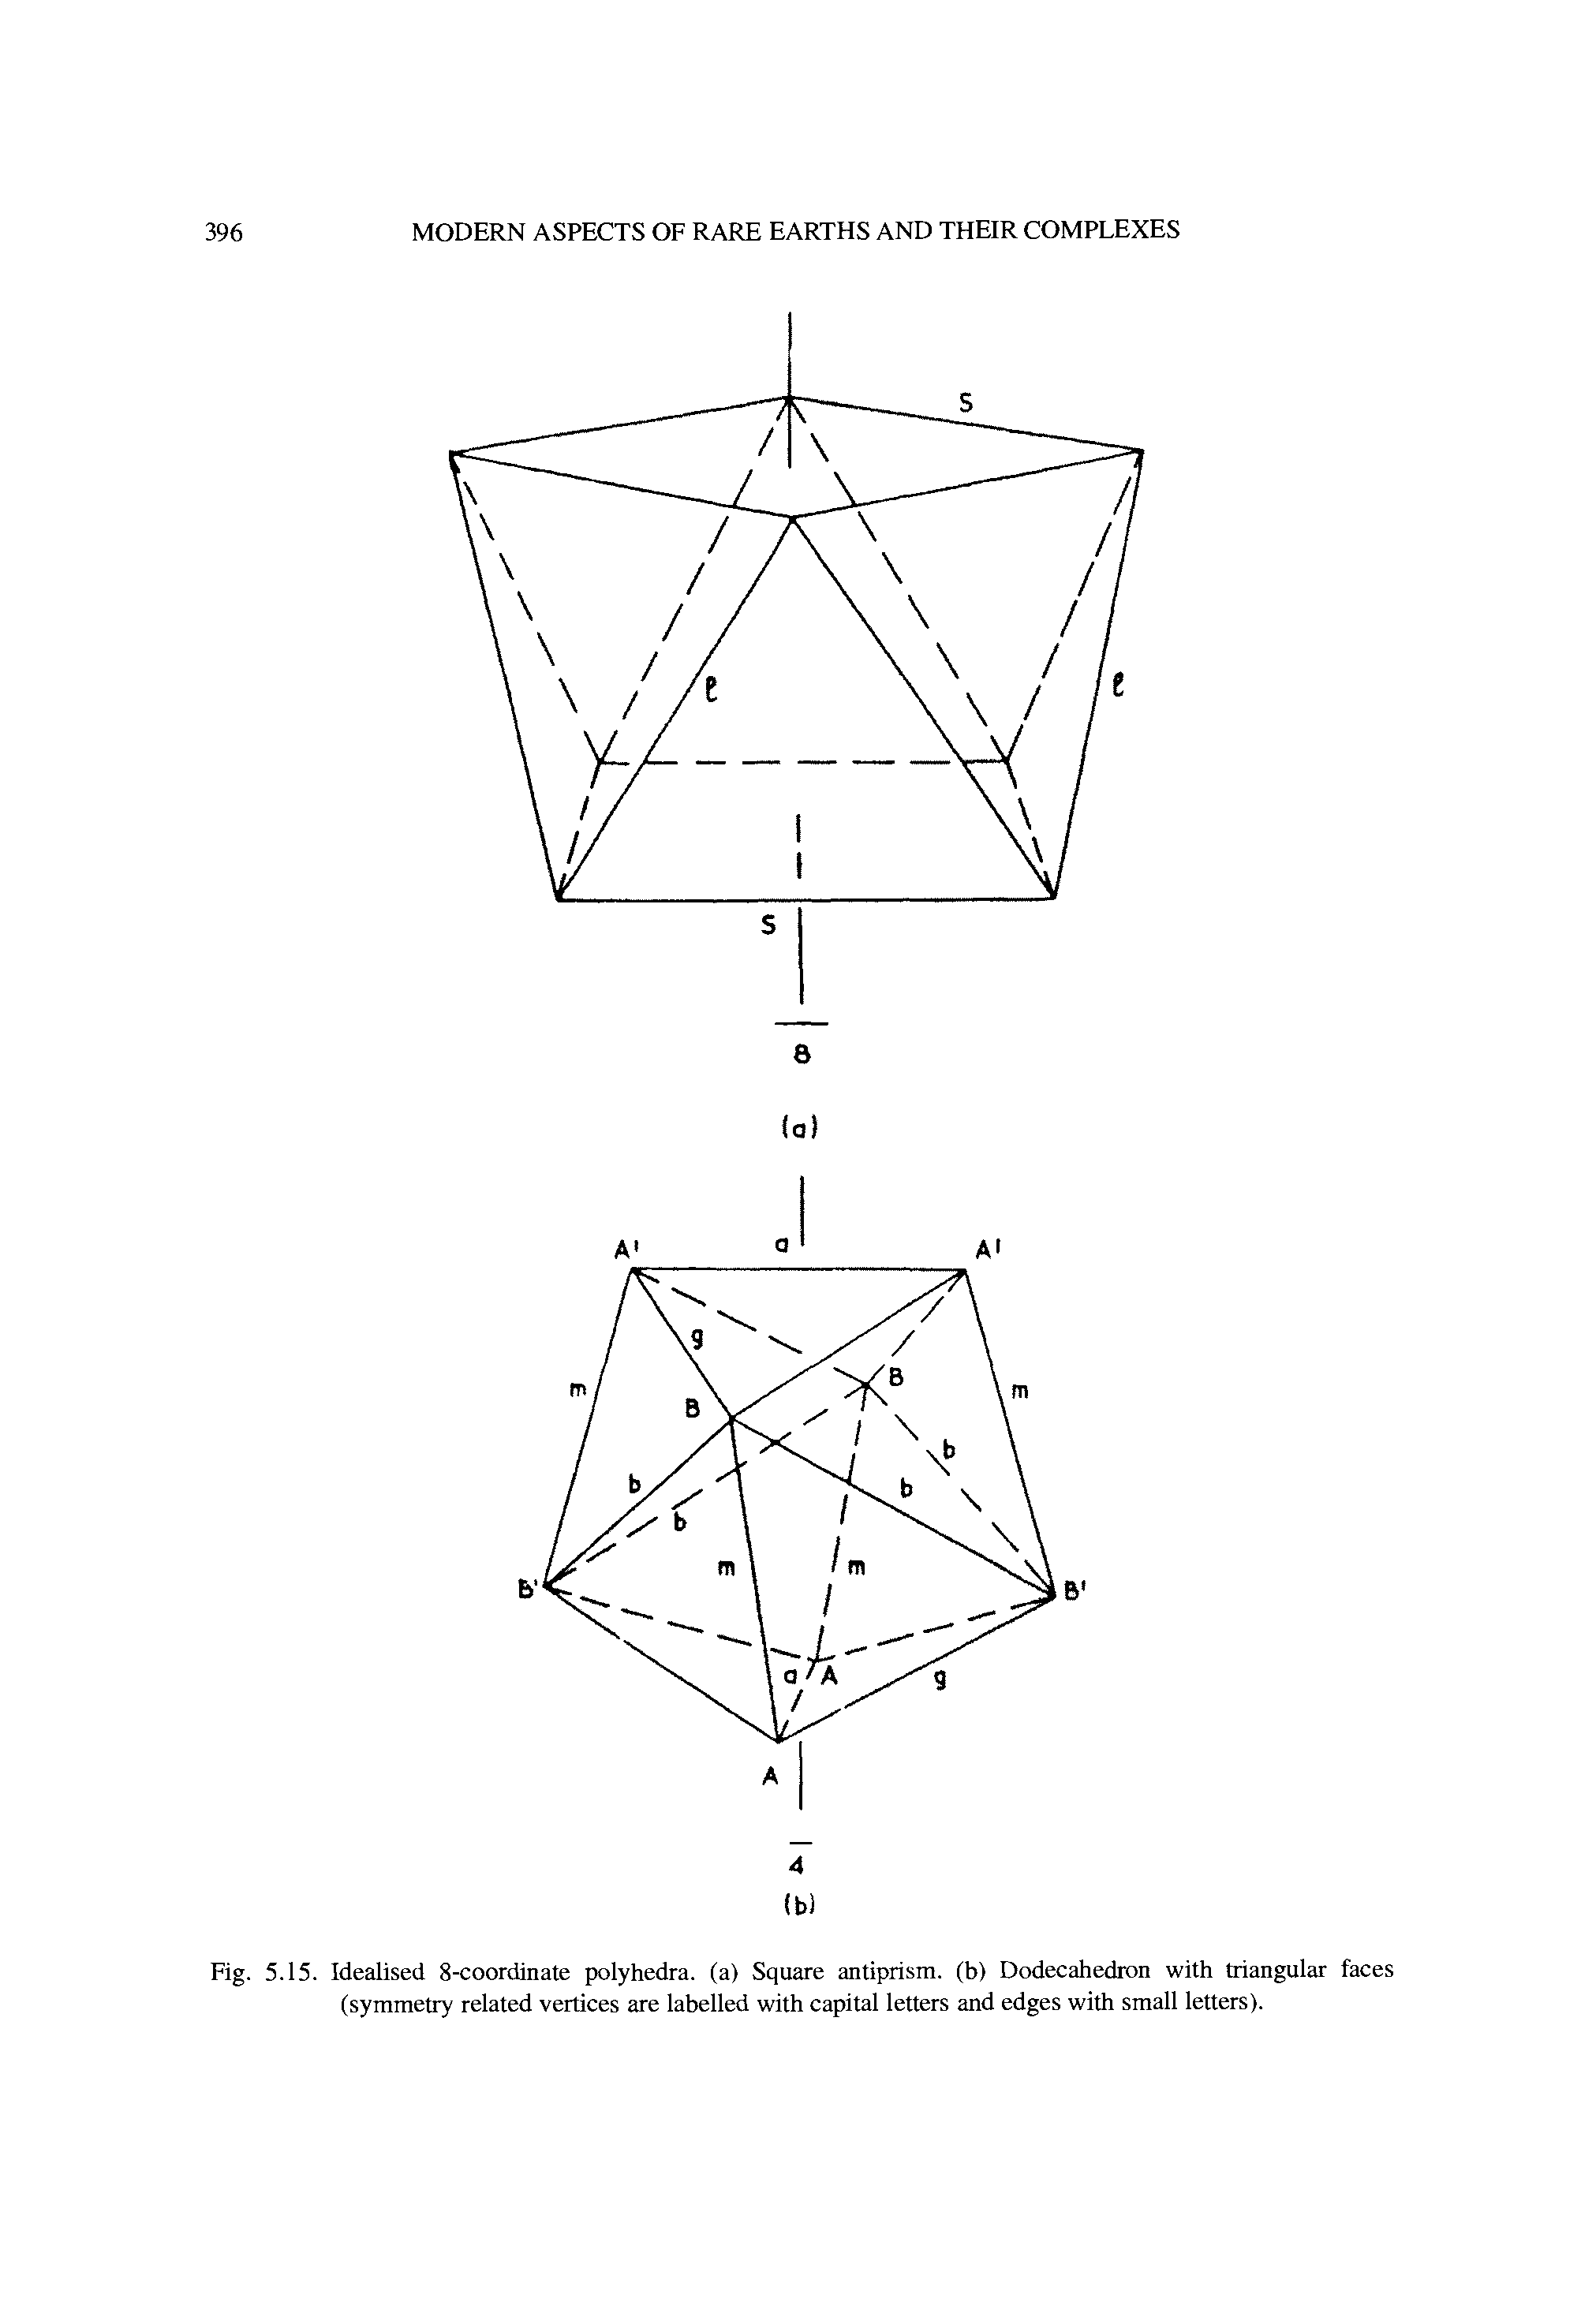 Fig. 5.15. Idealised 8-coordinate polyhedra. (a) Square antiprism, (b) Dodecahedron with triangular faces (symmetry related vertices are labelled with capital letters and edges with small letters).